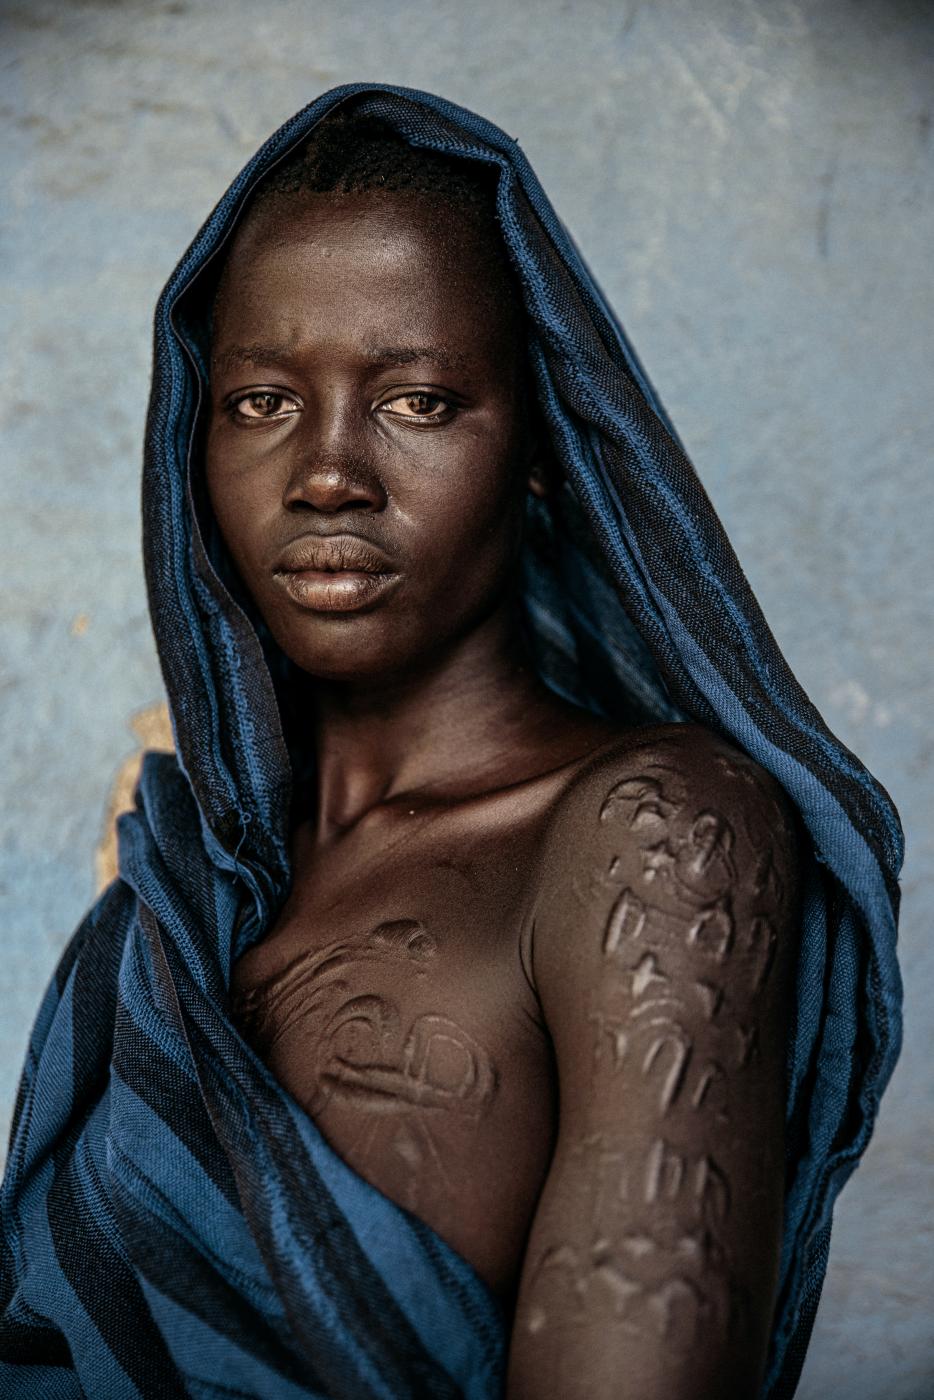 The language of scarifications: A photo essay on the Me'en tribal woman in Ethiopia | Buy this image